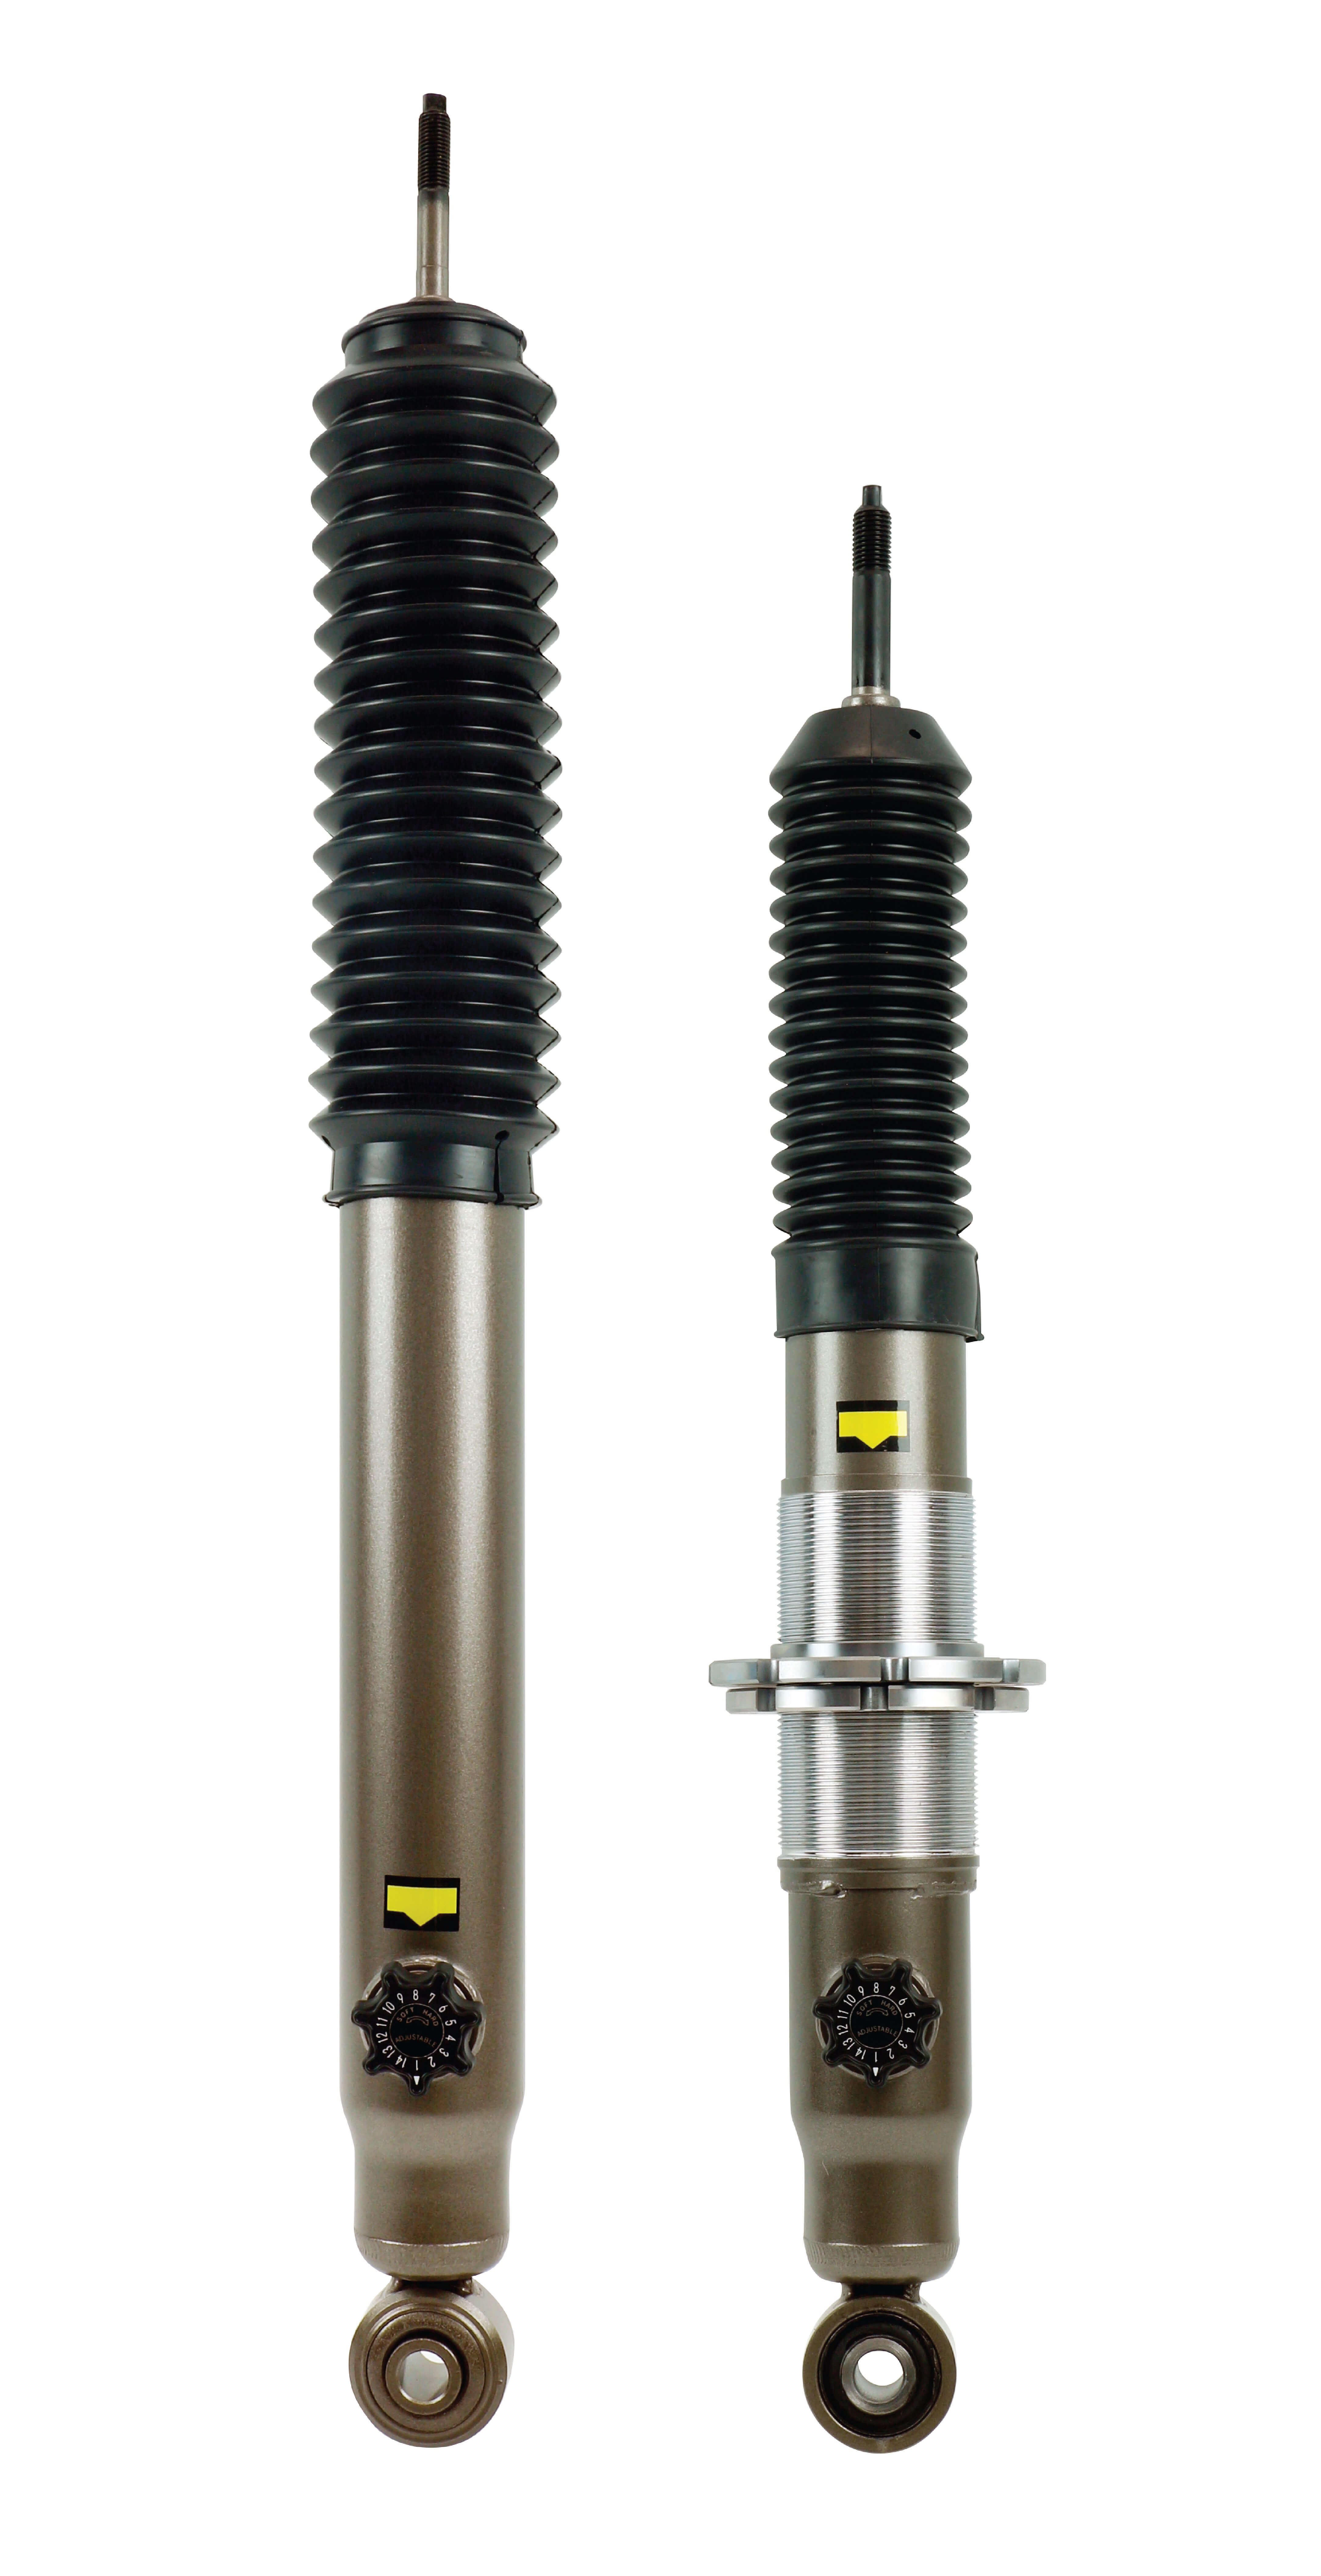 KYB Asian | Shock absorber and Suspension parts